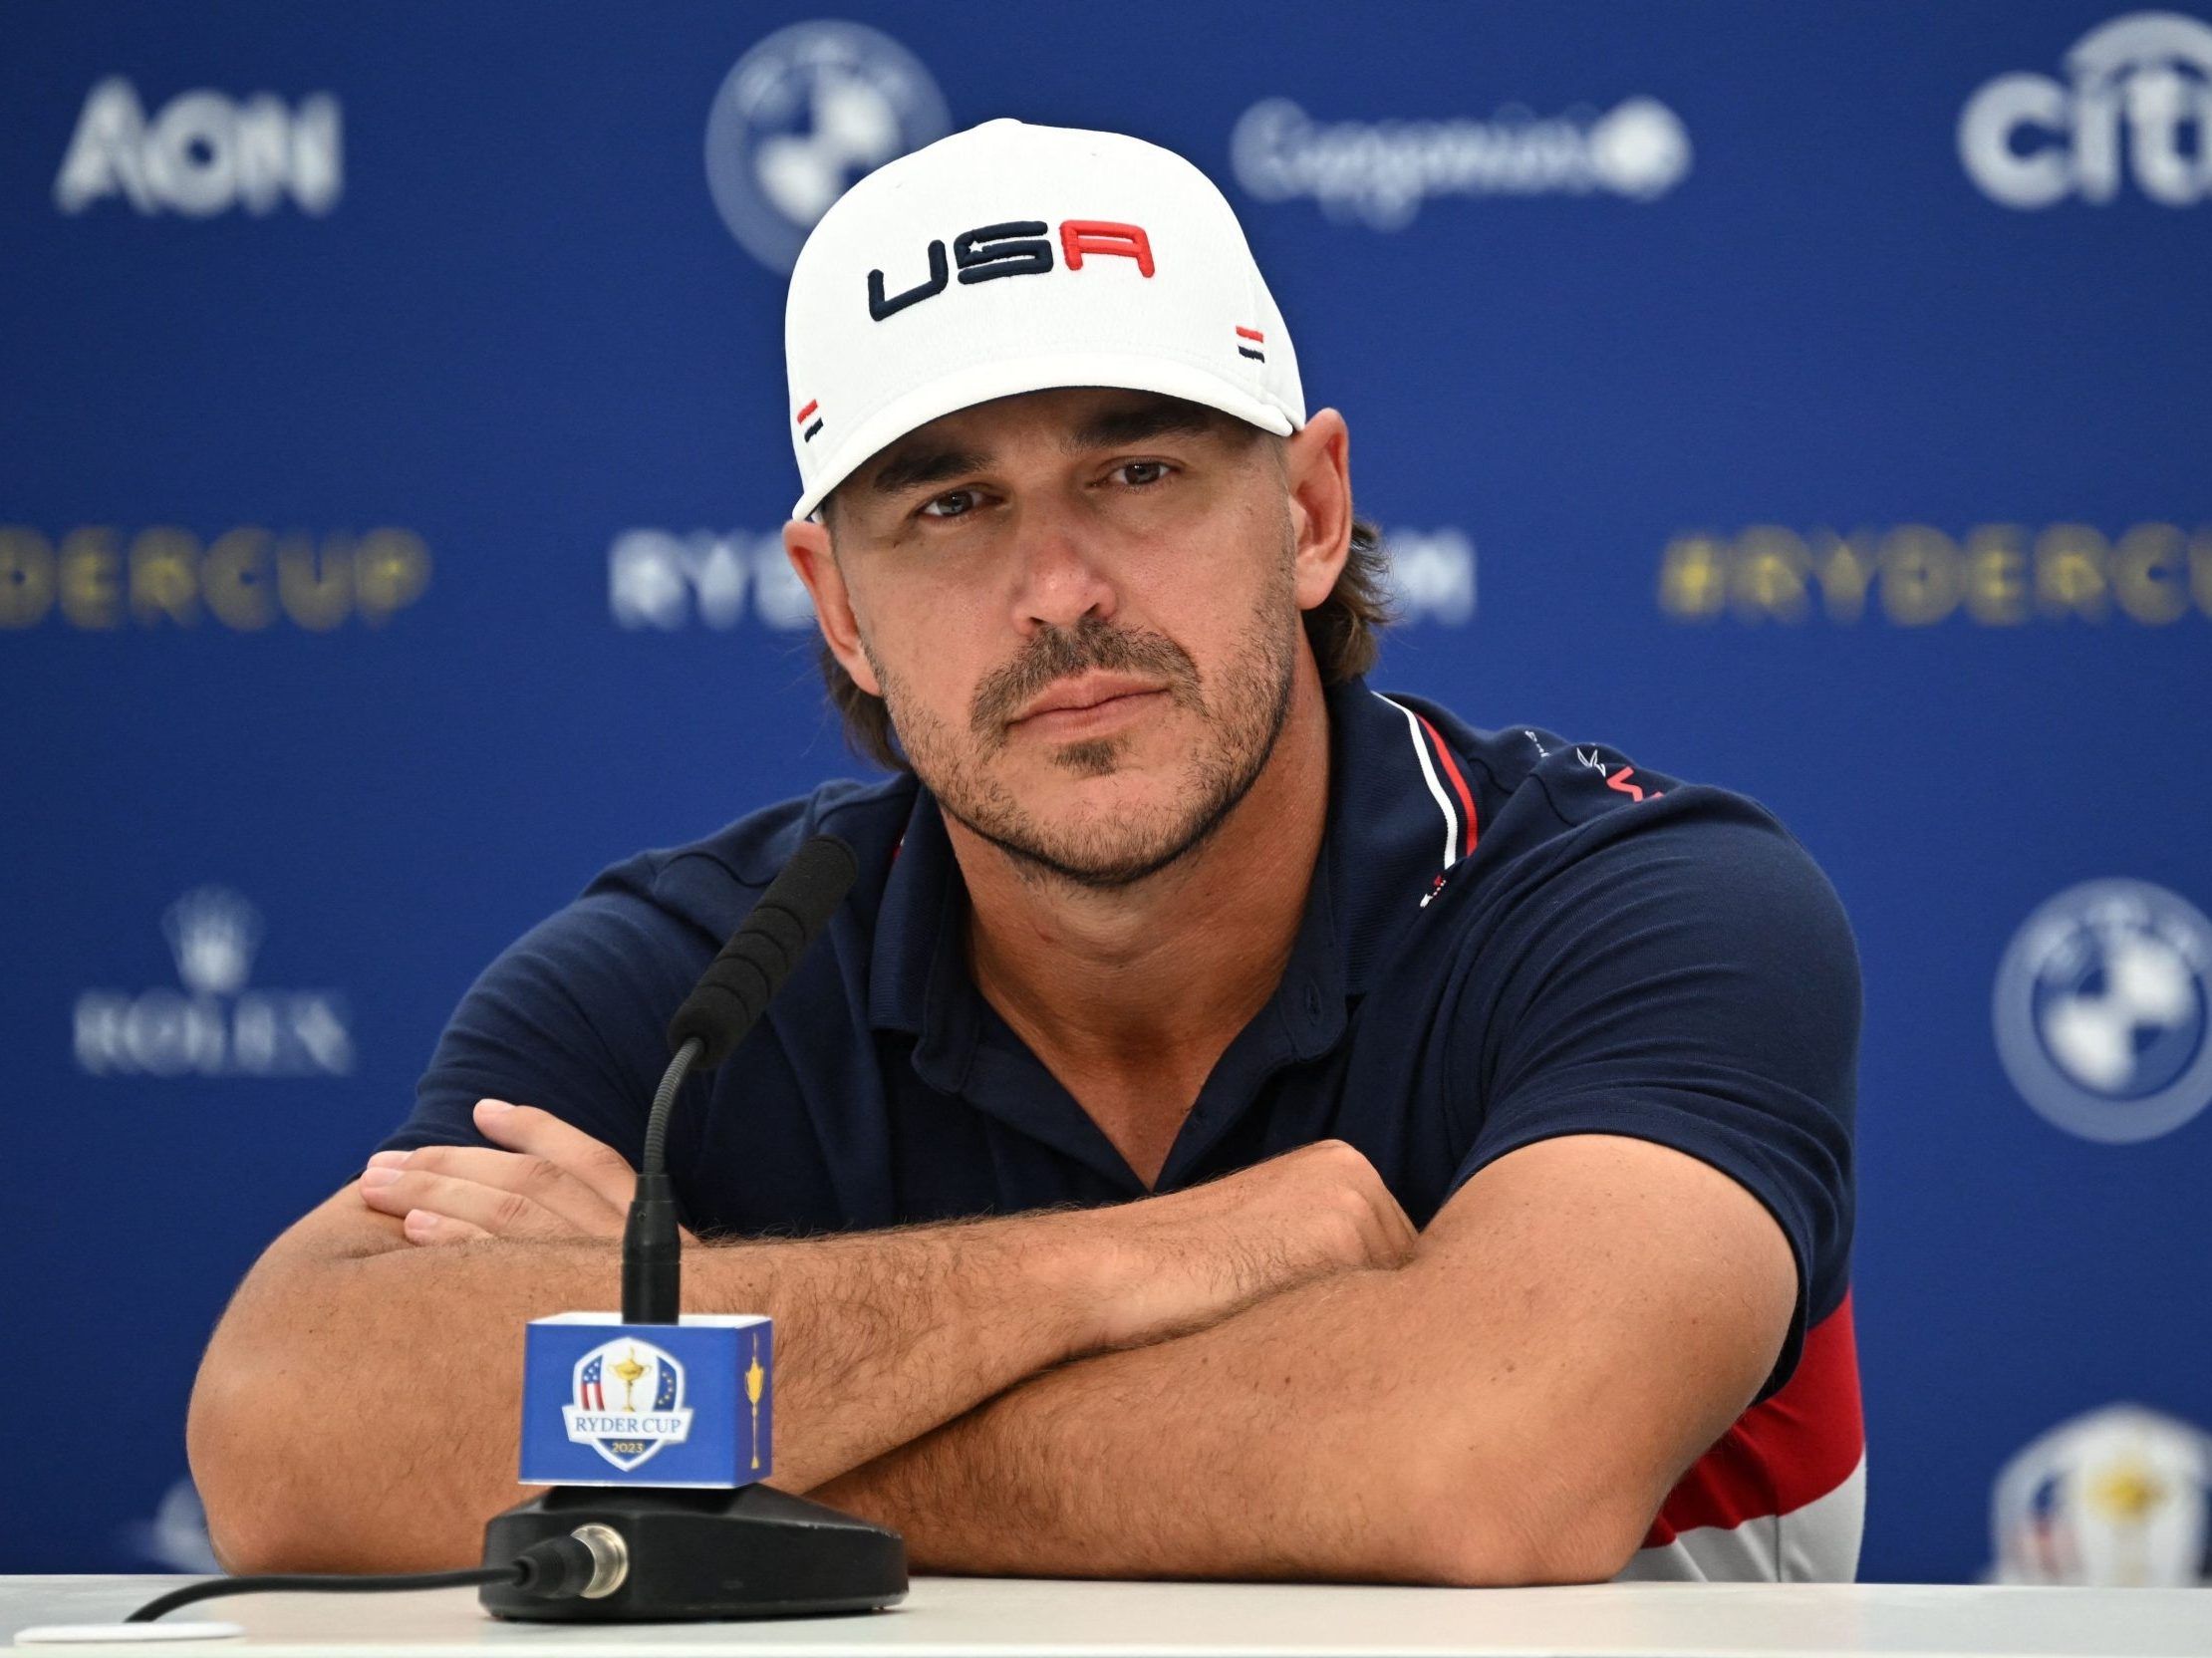 Brooks Koepka's Ryder Cup message to absent LIV players 'Play better